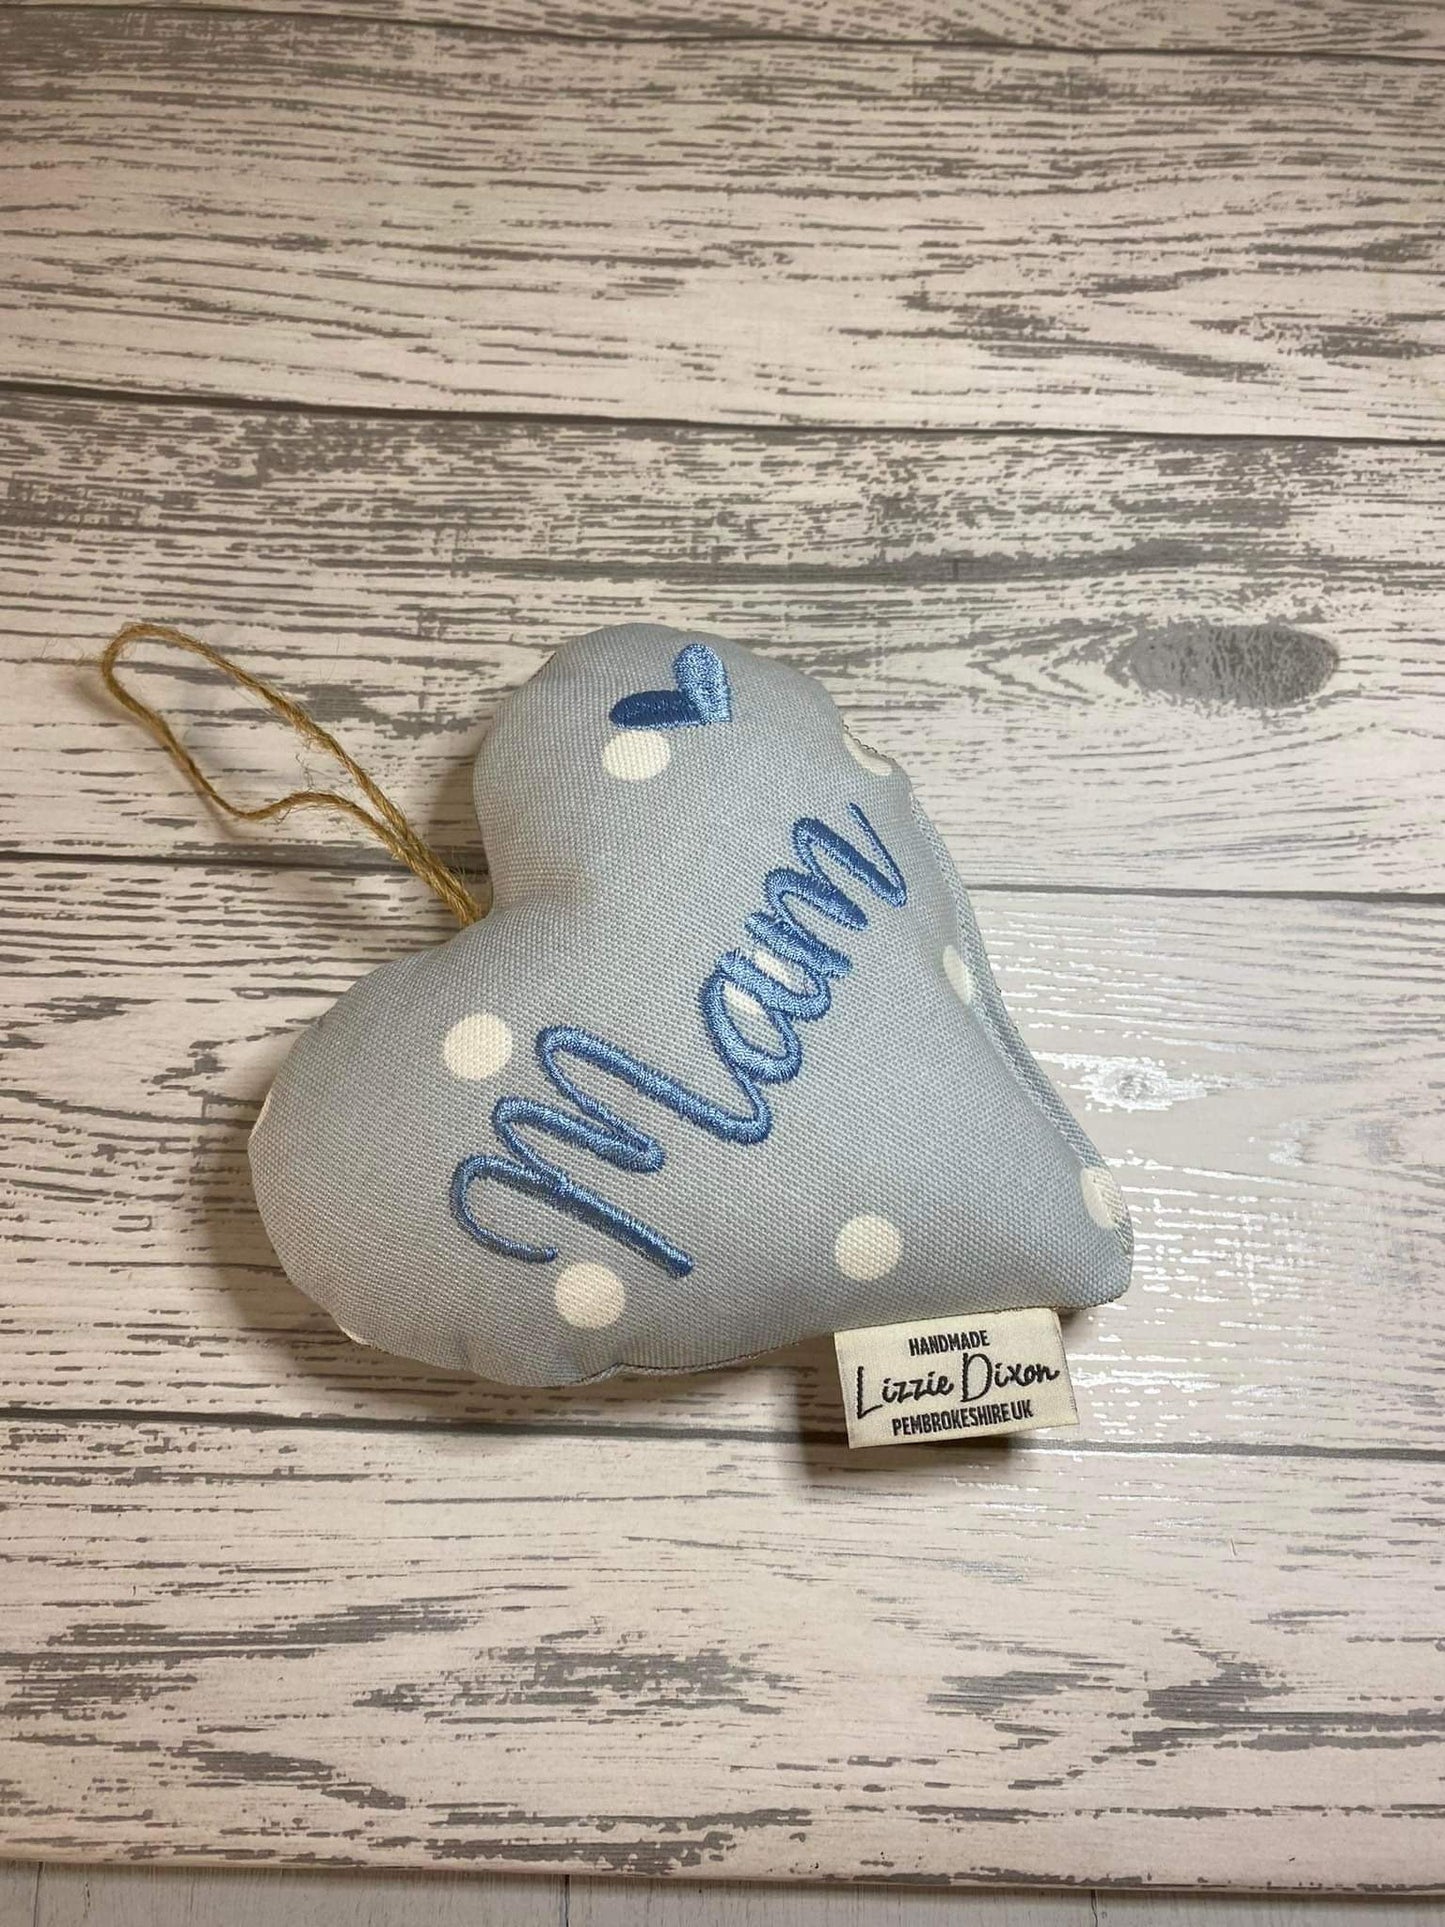 Mother's Day Decorative Hanging Heart- Mum Personalised Mother's Day Gift-Pale Blue Dotty and Floral Stuffed Lavender hanging Heart